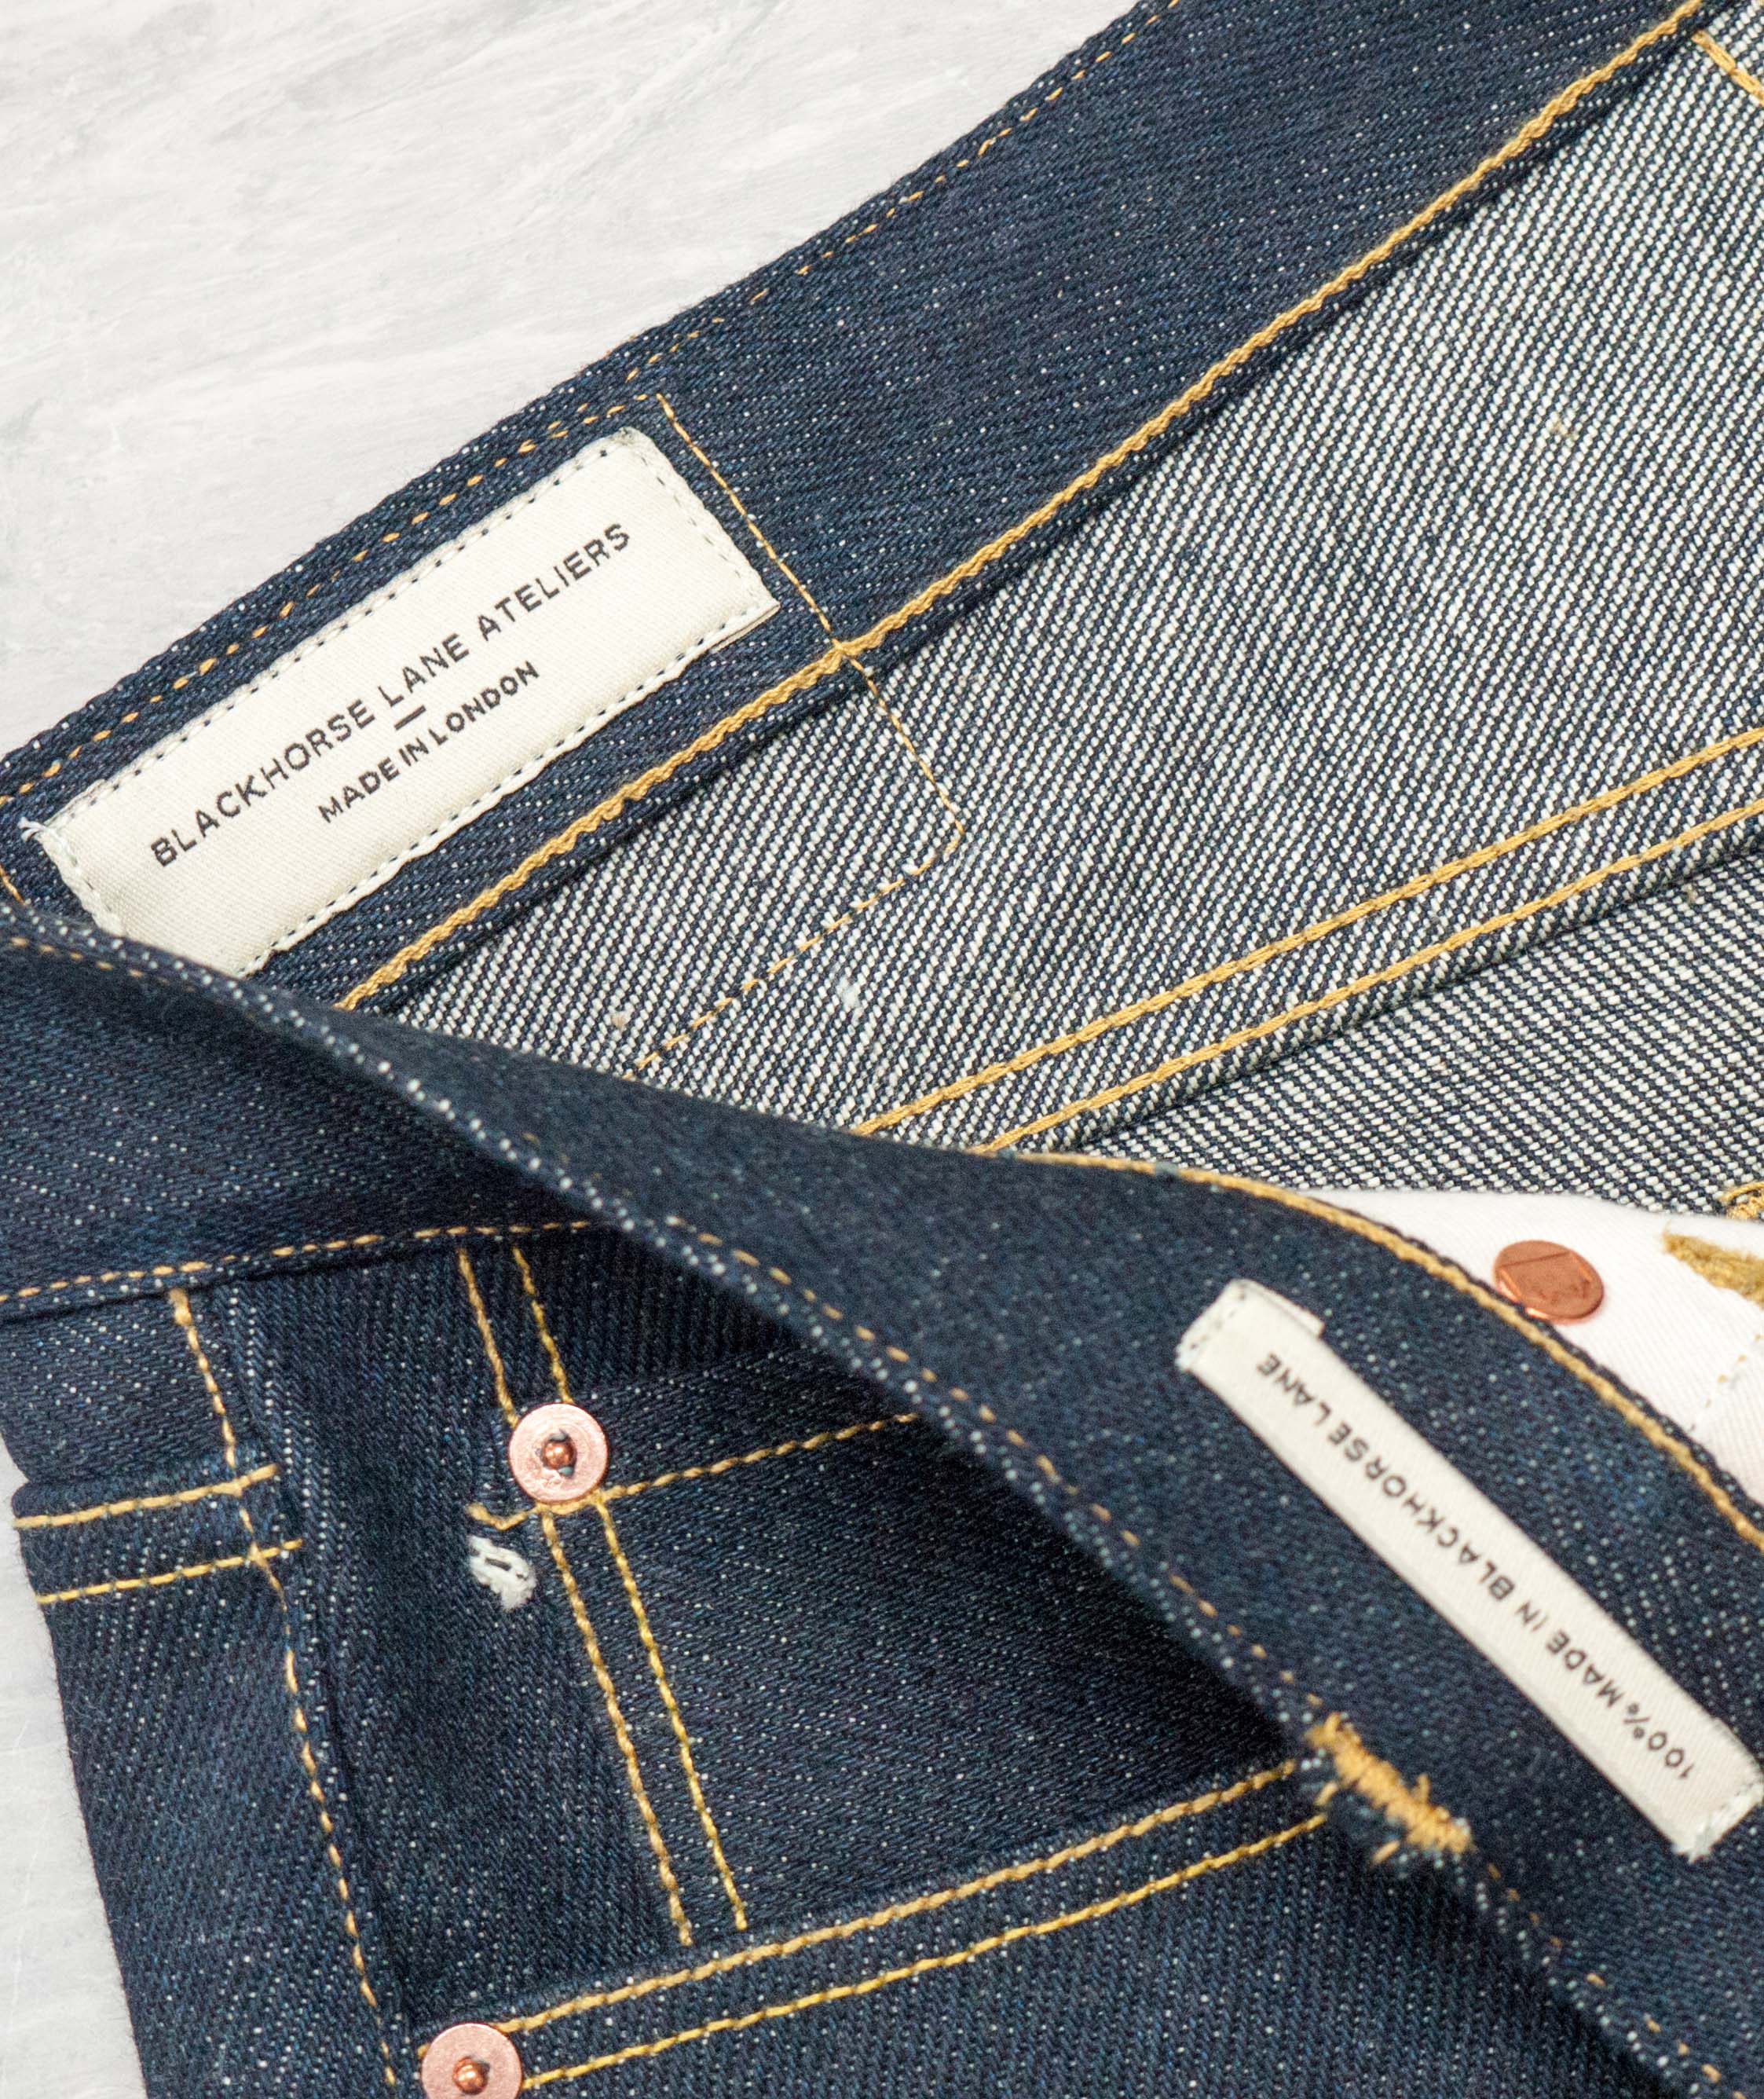 How To Wash your Selvedge Denim Jeans | Oliver Sweeney